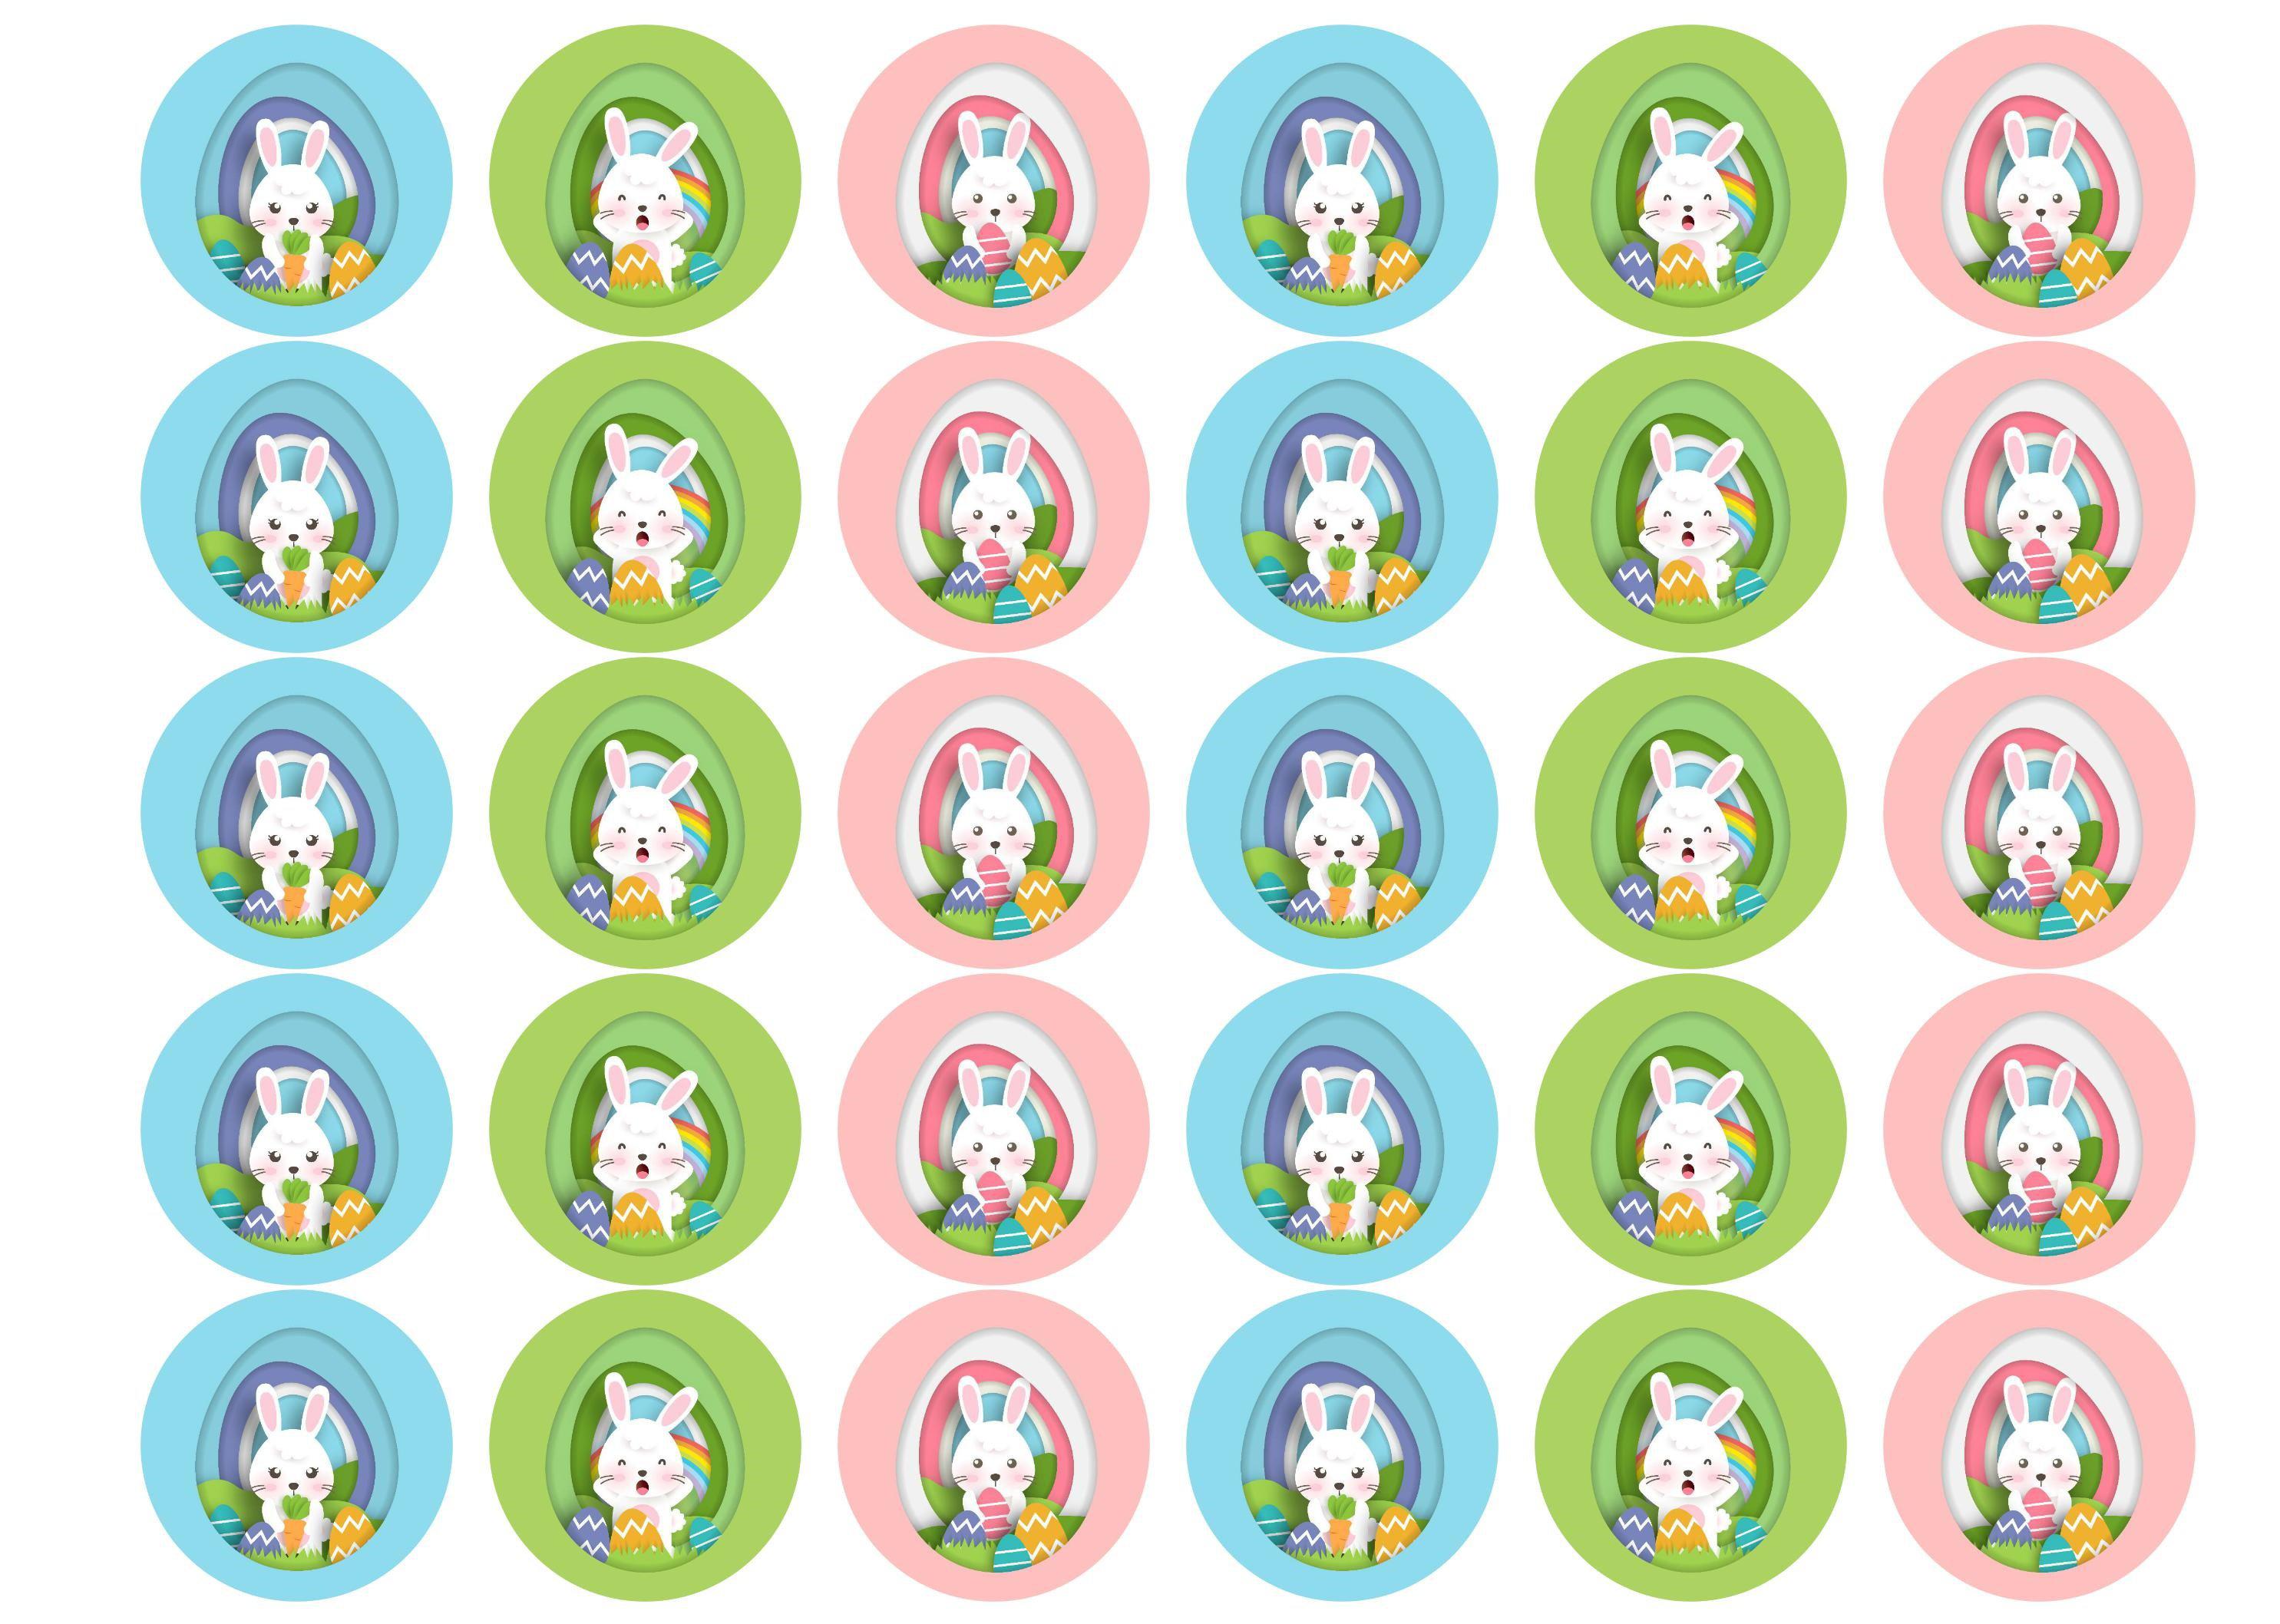 30 edible cupcake toppers with brightly coloured Easter bunnies